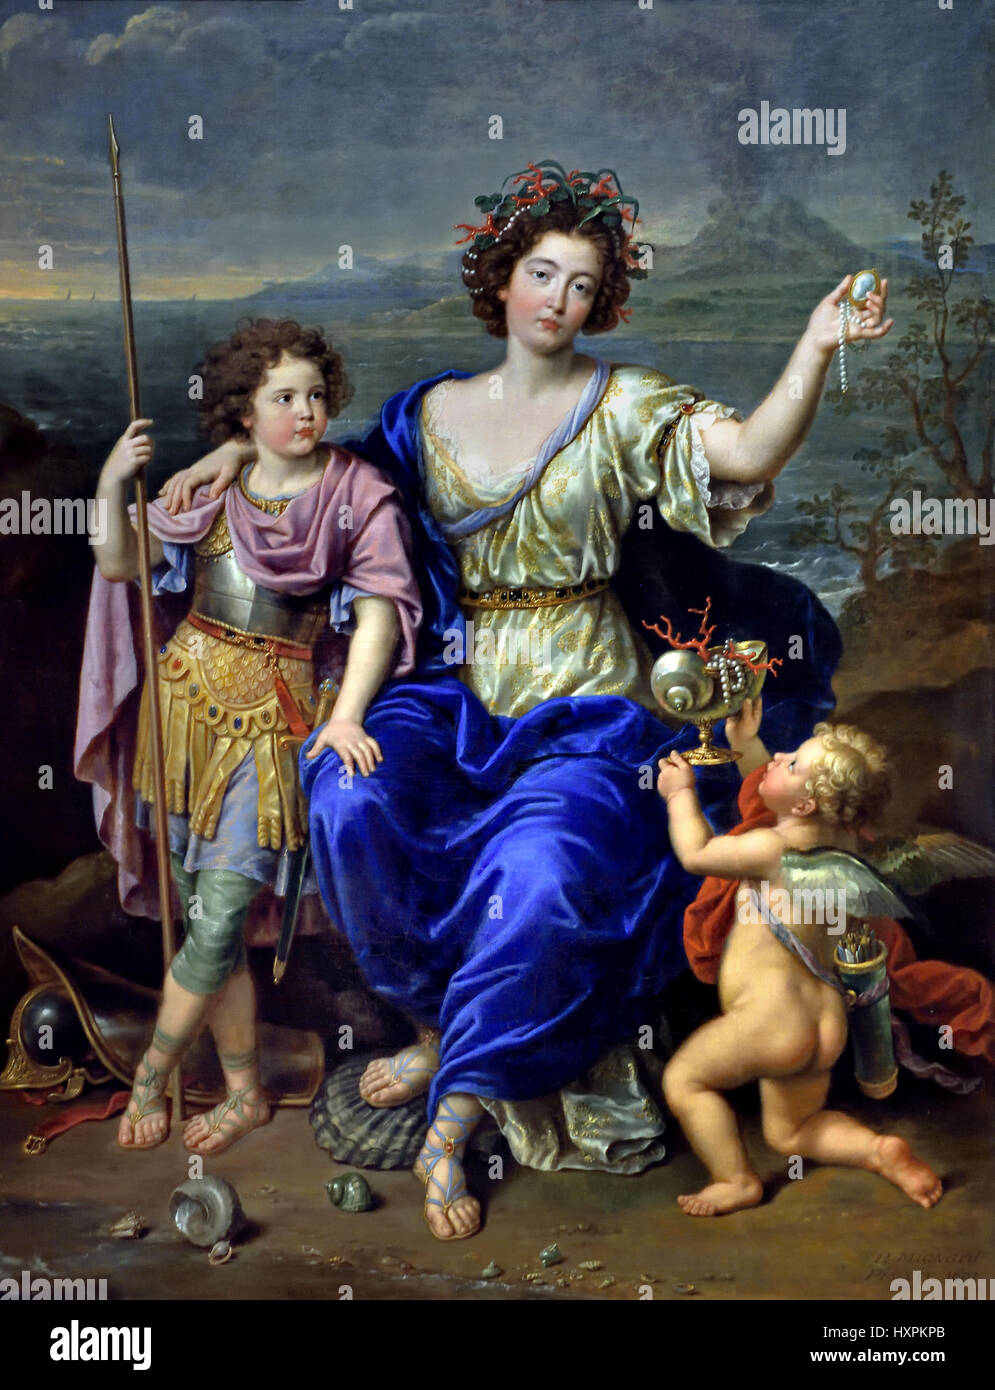 The Marquise de Seignelay and Two of her Sons Pierre Mignard 1612 - 1695 France French  ( Catherine-Thérèse de Matignon Thorigny (1662 - 1699) married Jean-Baptiste-Antoine Colbert (1651 - 1690), Marquis de Seignelay in 1679. ) Stock Photo